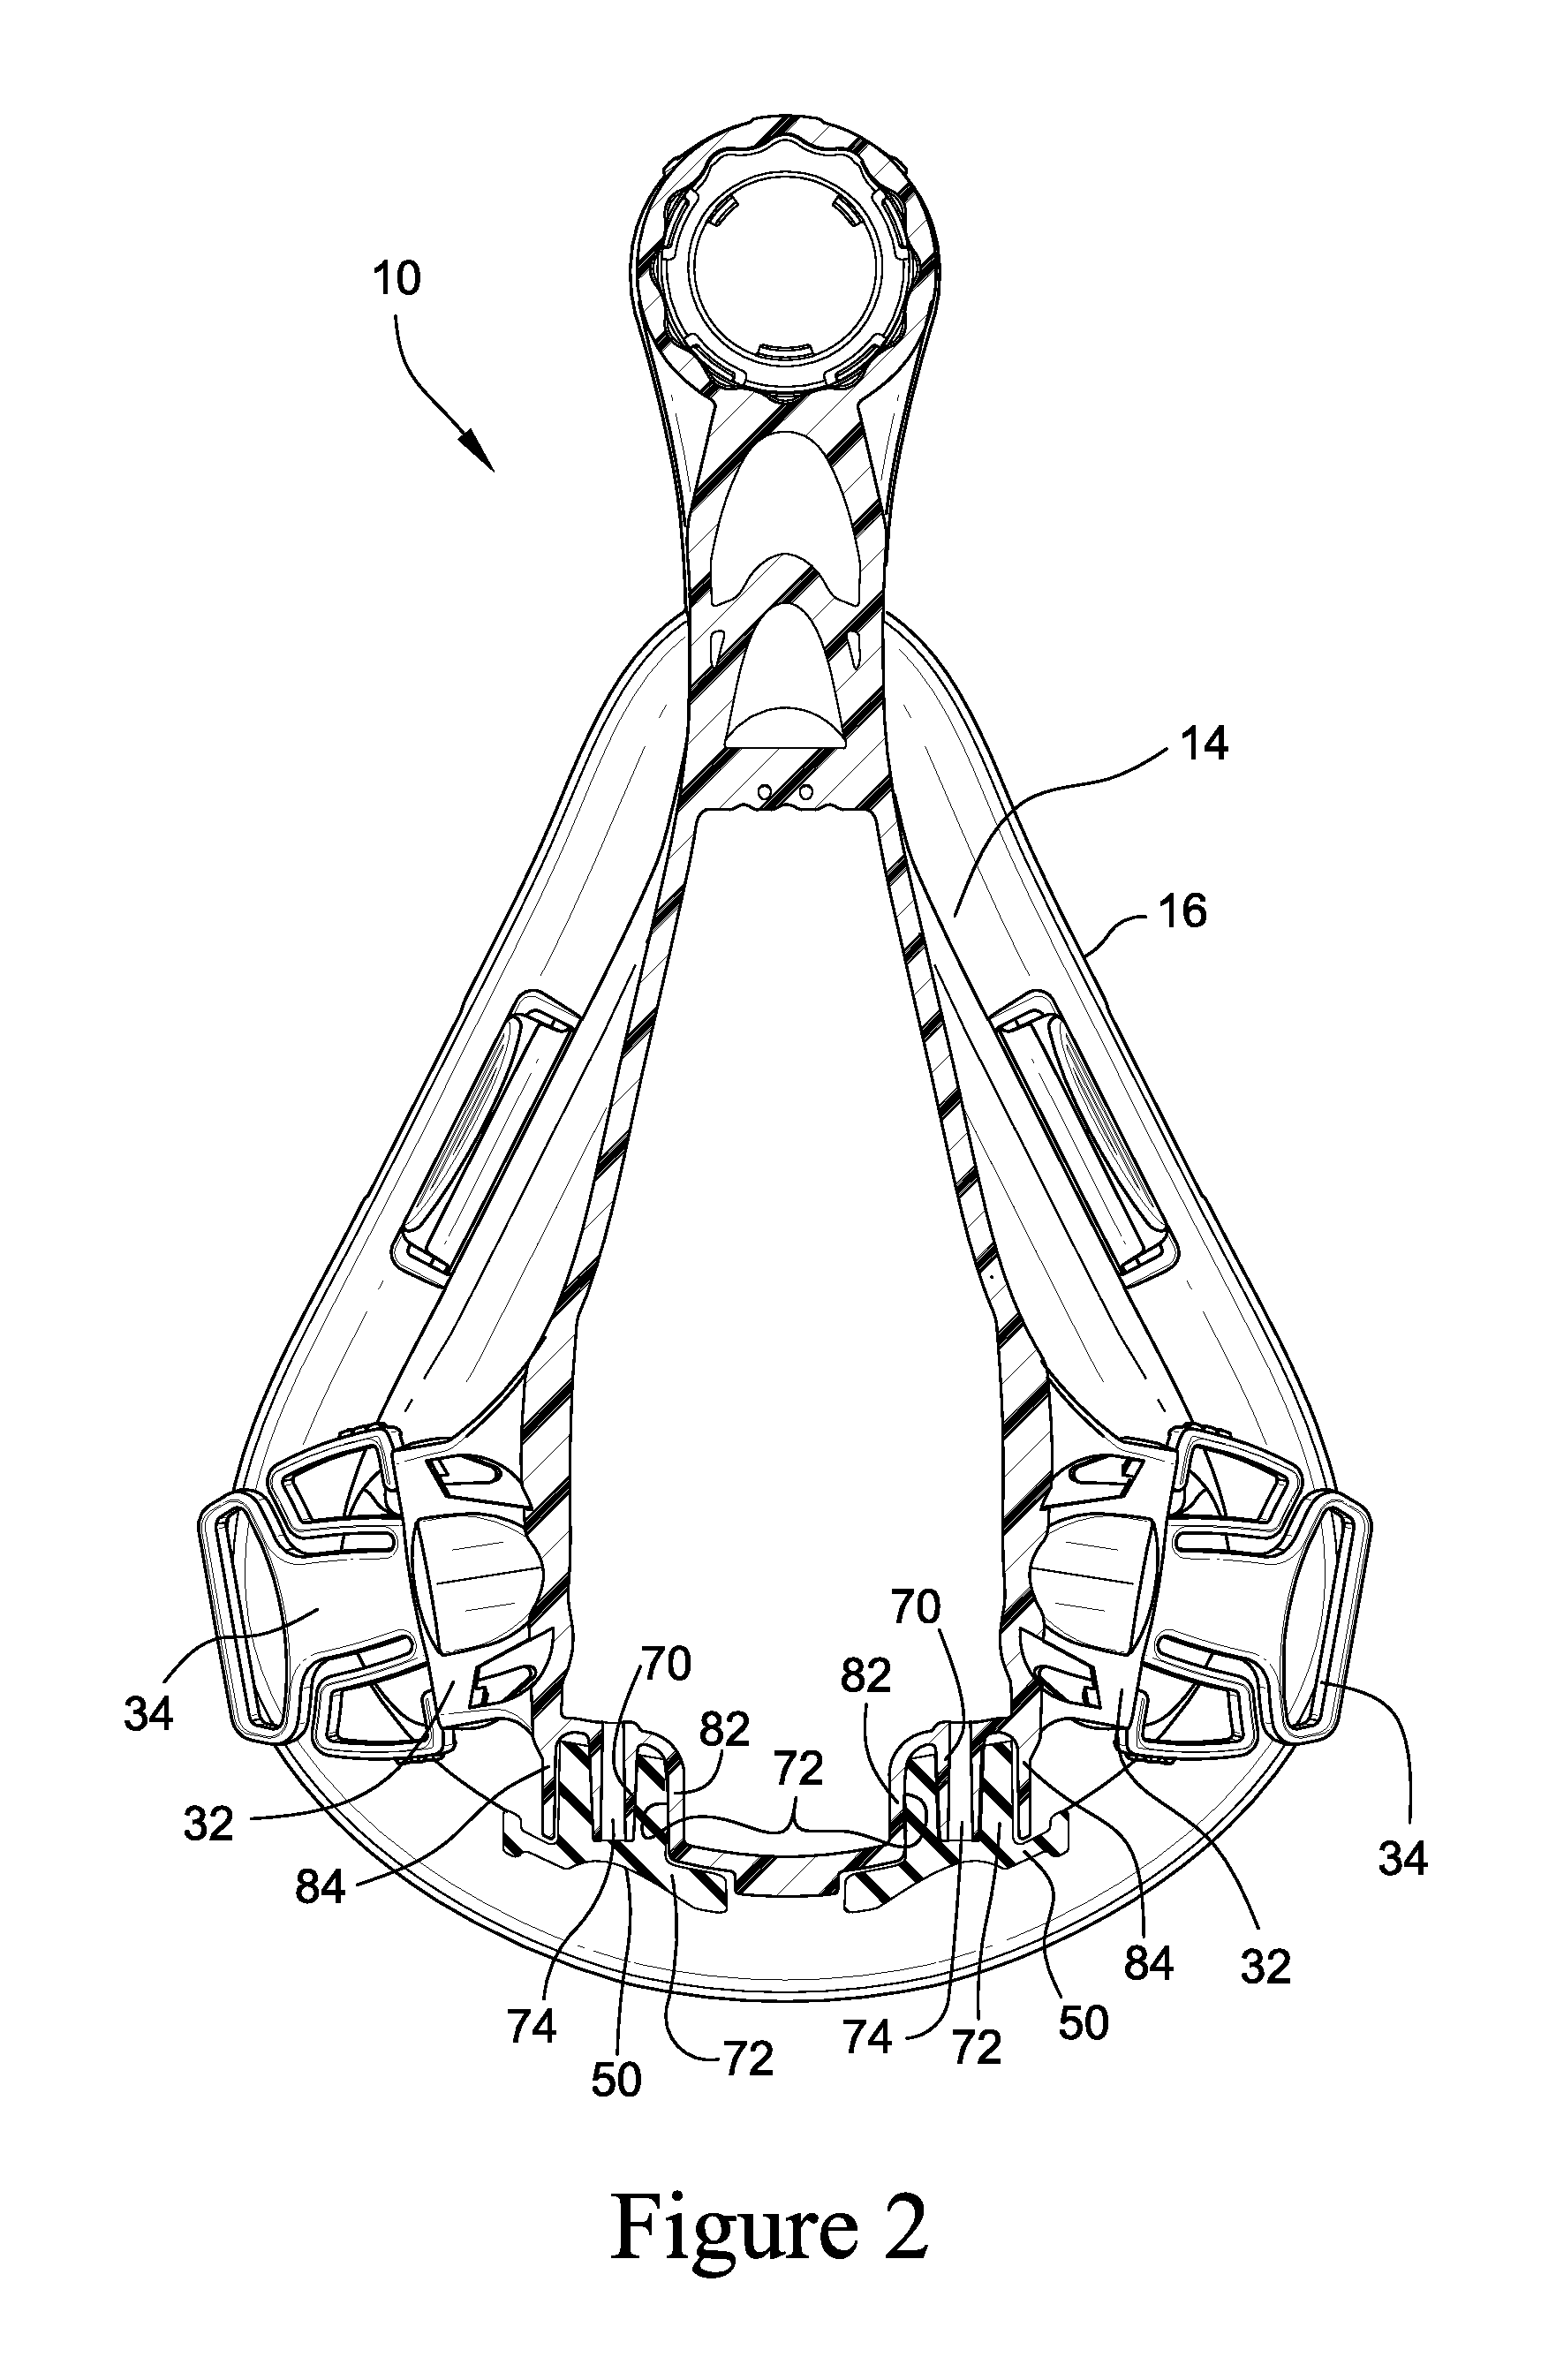 Supplemental gas delivery device for mask assembly